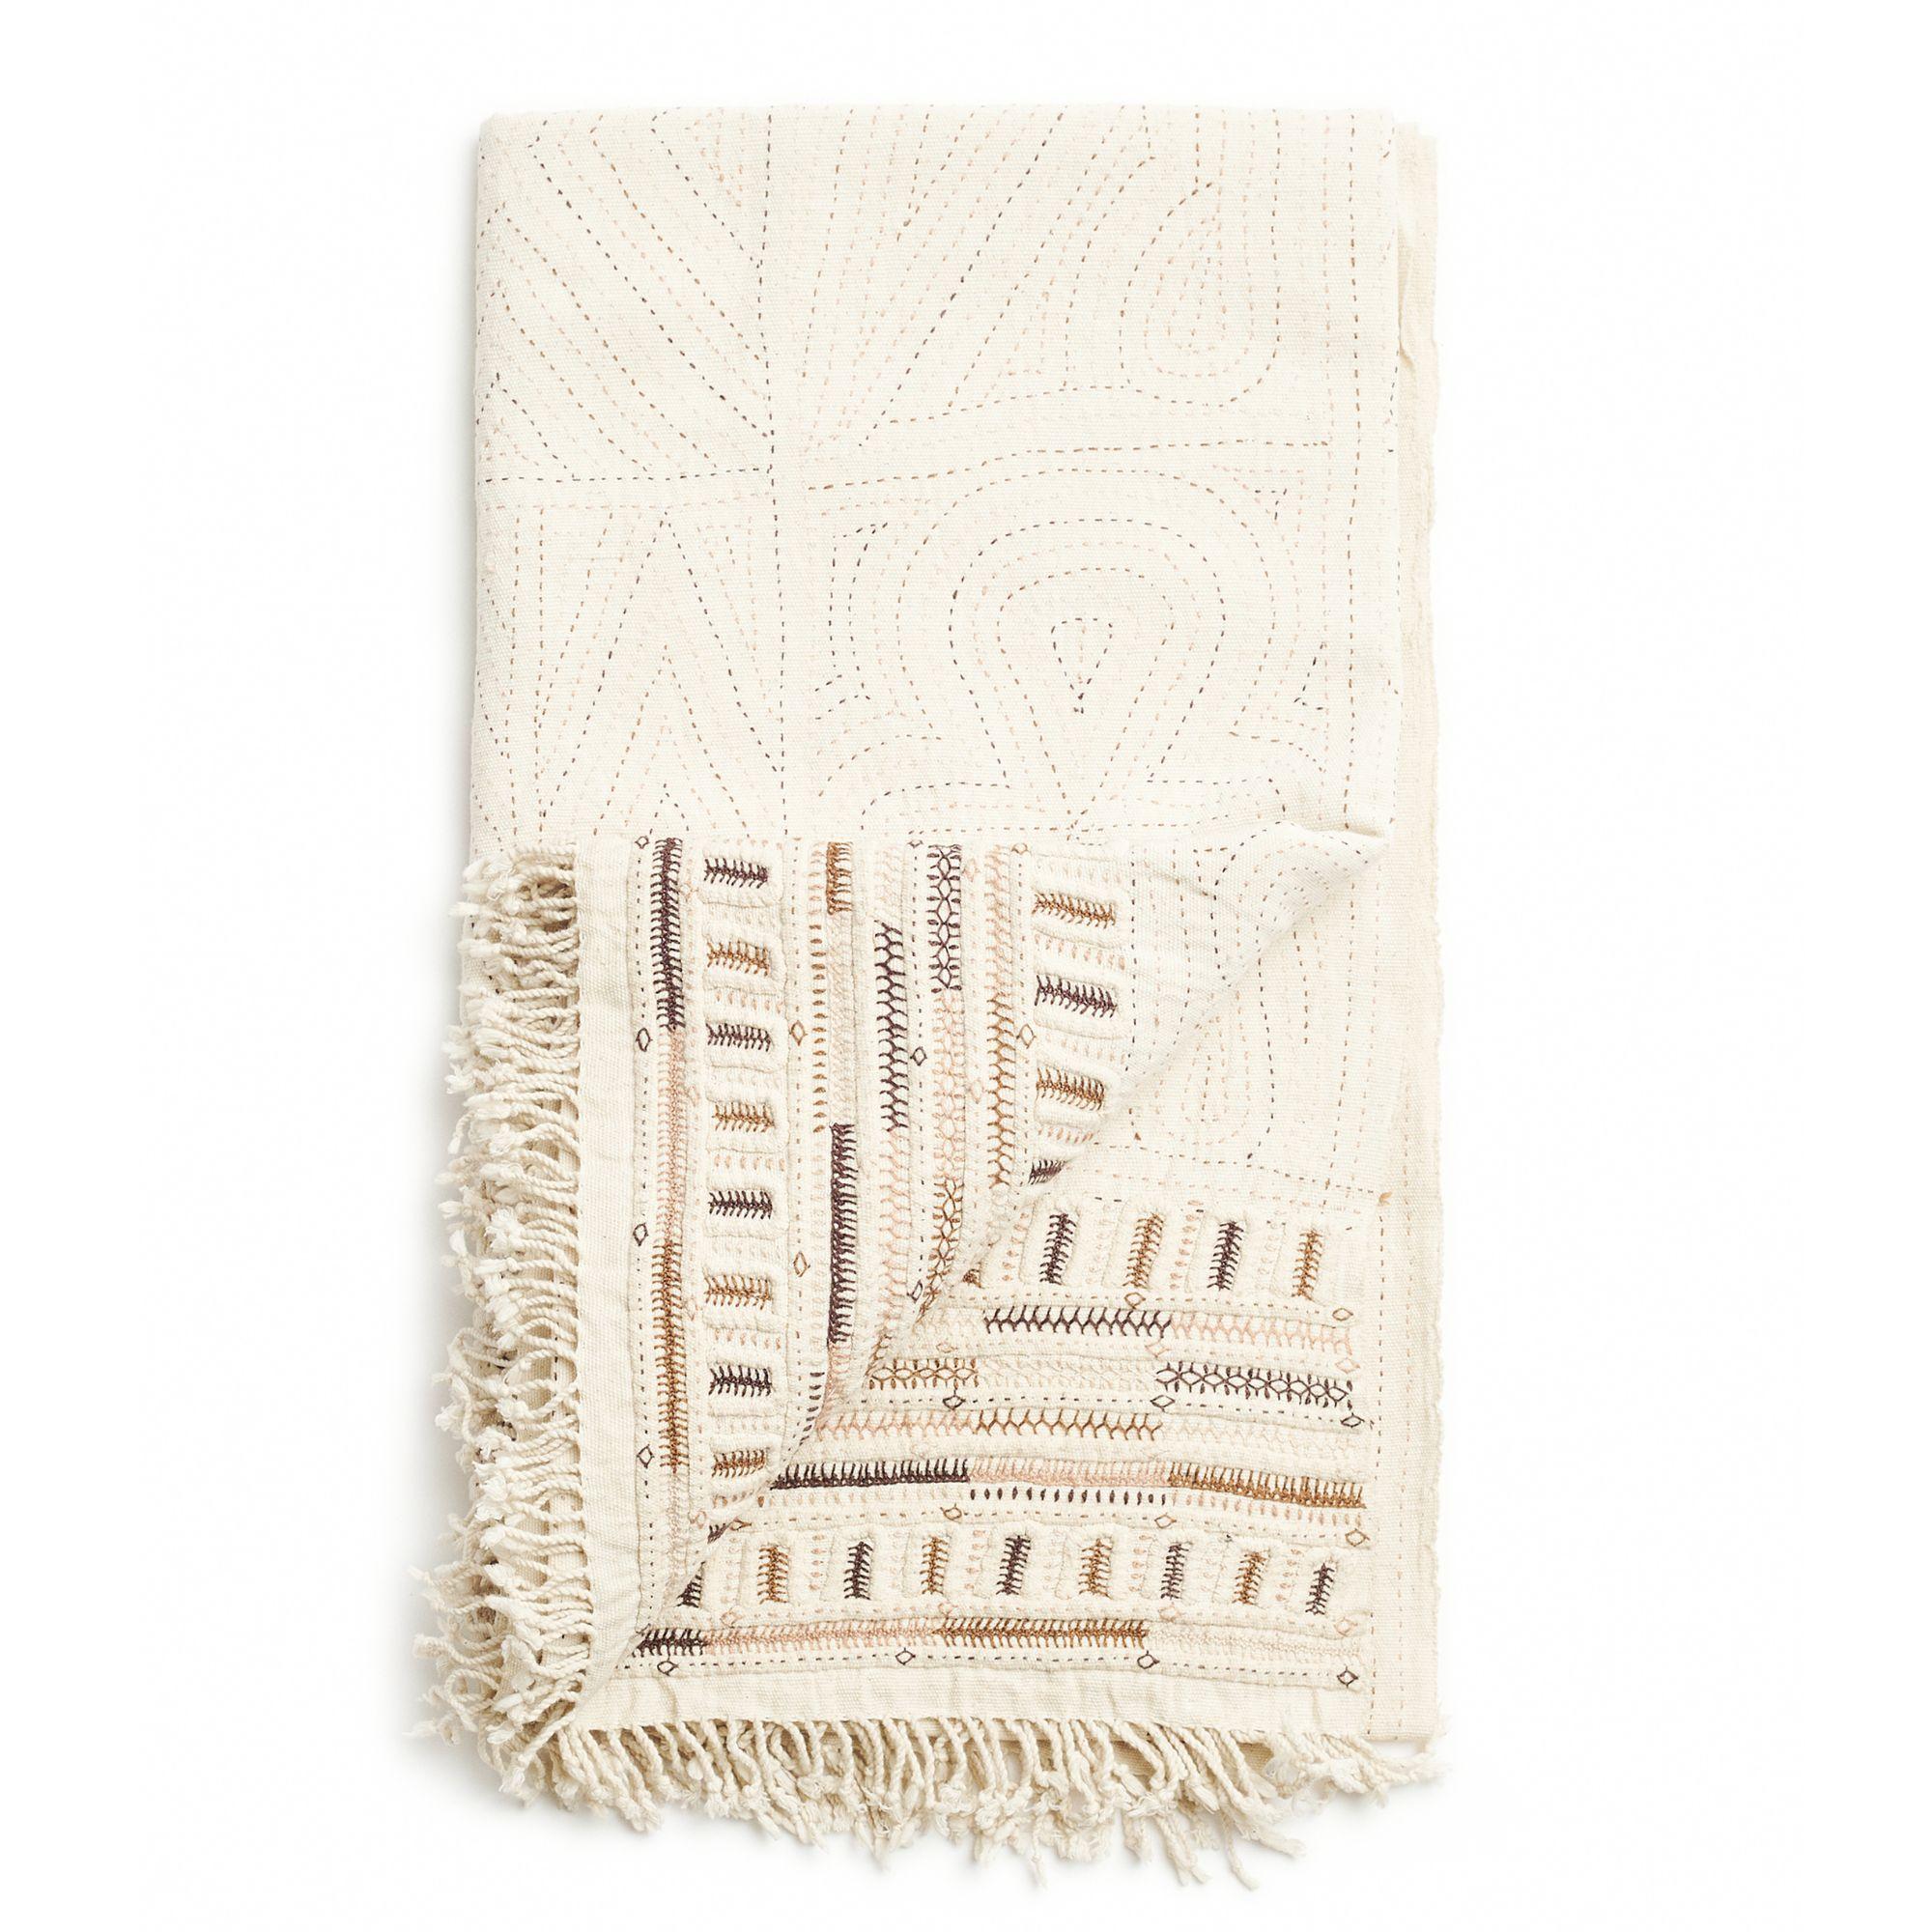 Organic Modern Unah Earthy Throw , Minimally Hand Embroidered in Intricate Patterns by Artisans For Sale